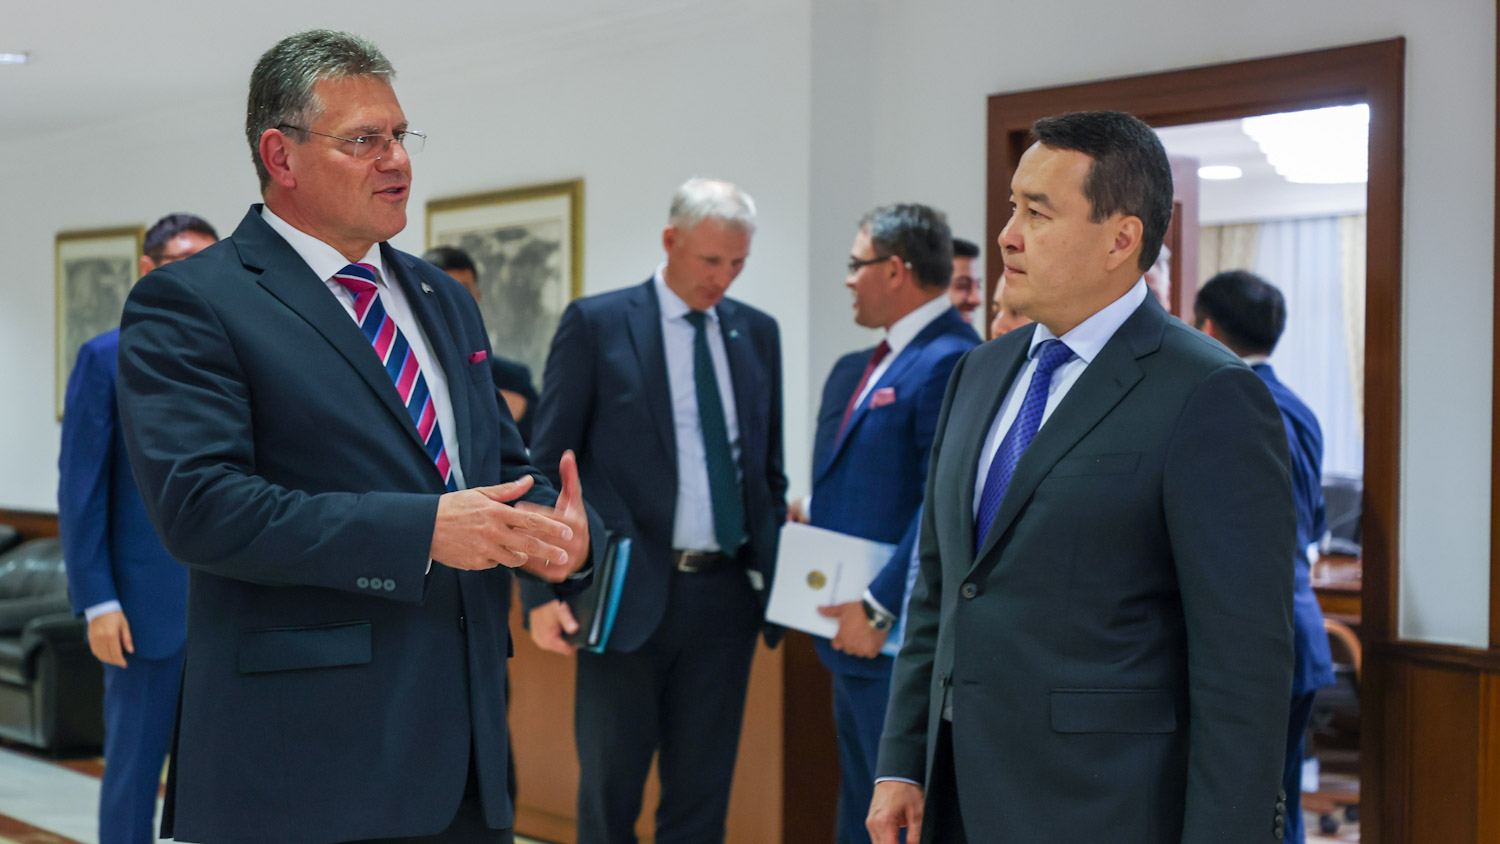 Kazakhstan keen to further boost investment partnership, diversify mutual trade with EU